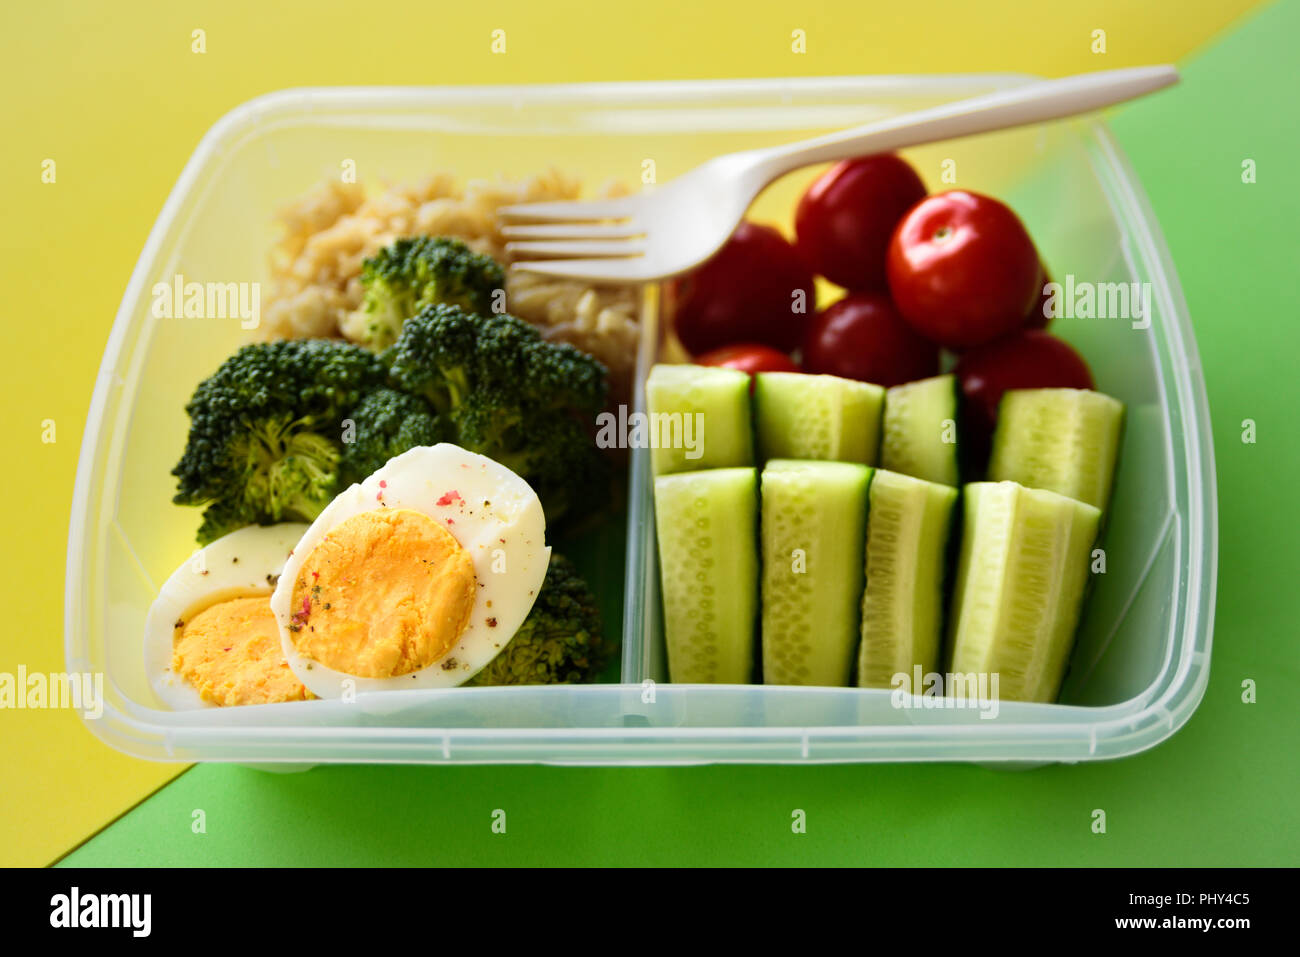 Lunch box with healthy food. Rice, broccoli, tomato, cucumber, eggs, apple and water. On yellow and green background Stock Photo